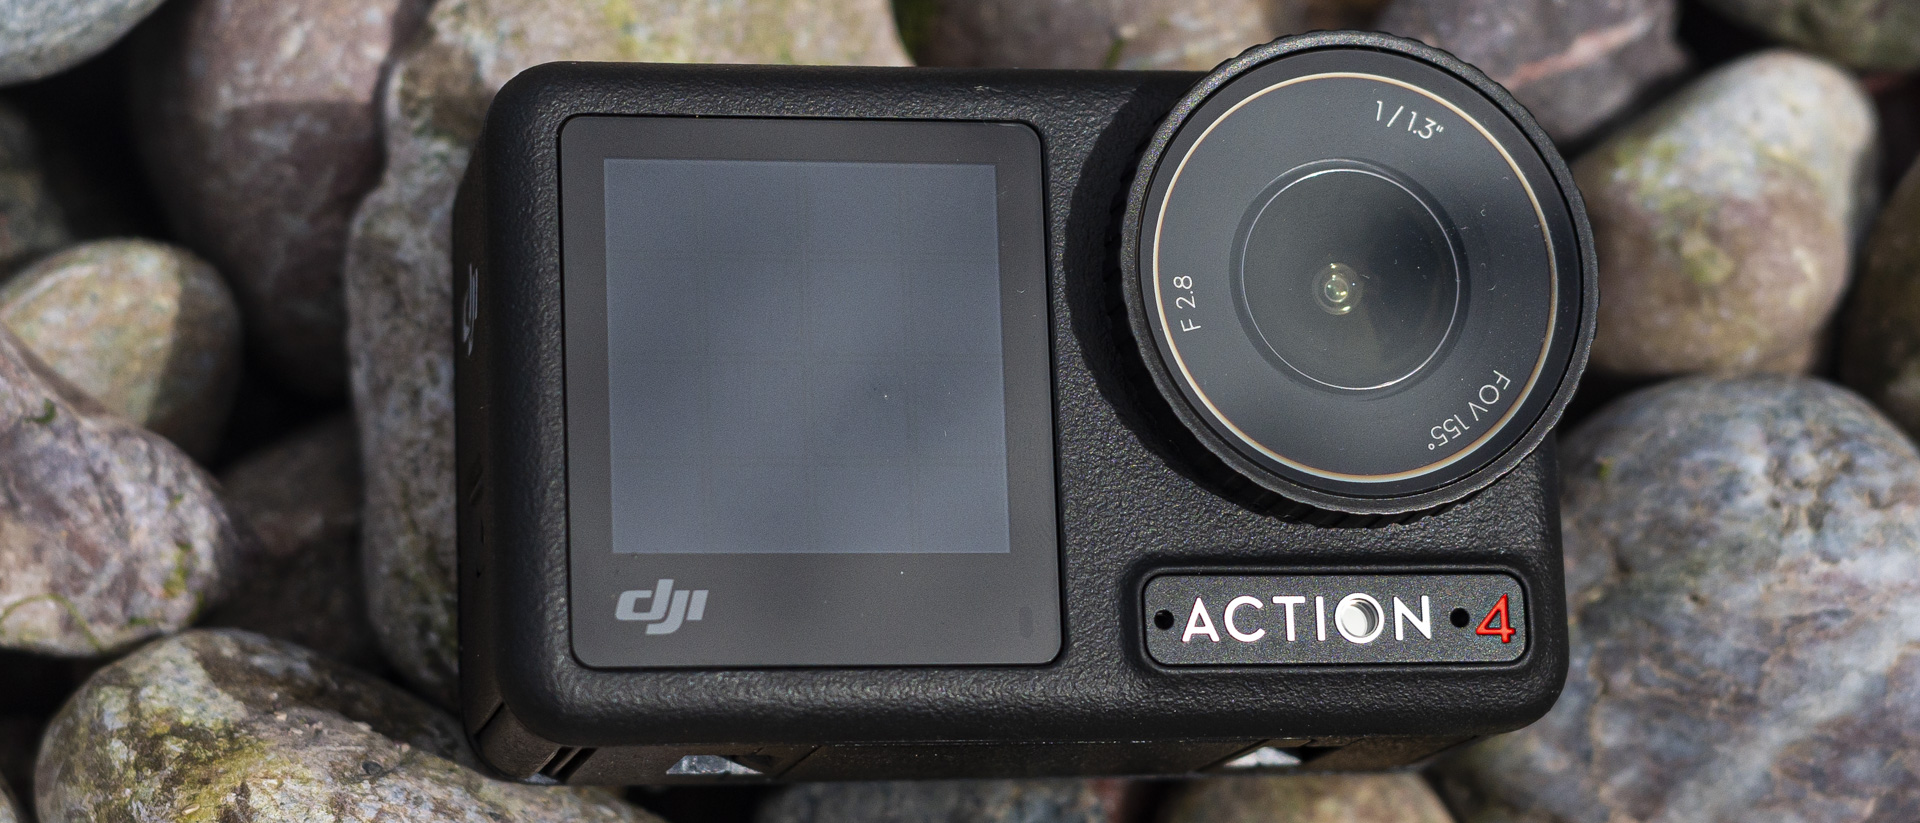 DJI Osmo Action 4 review: a polished GoPro alternative with hassle